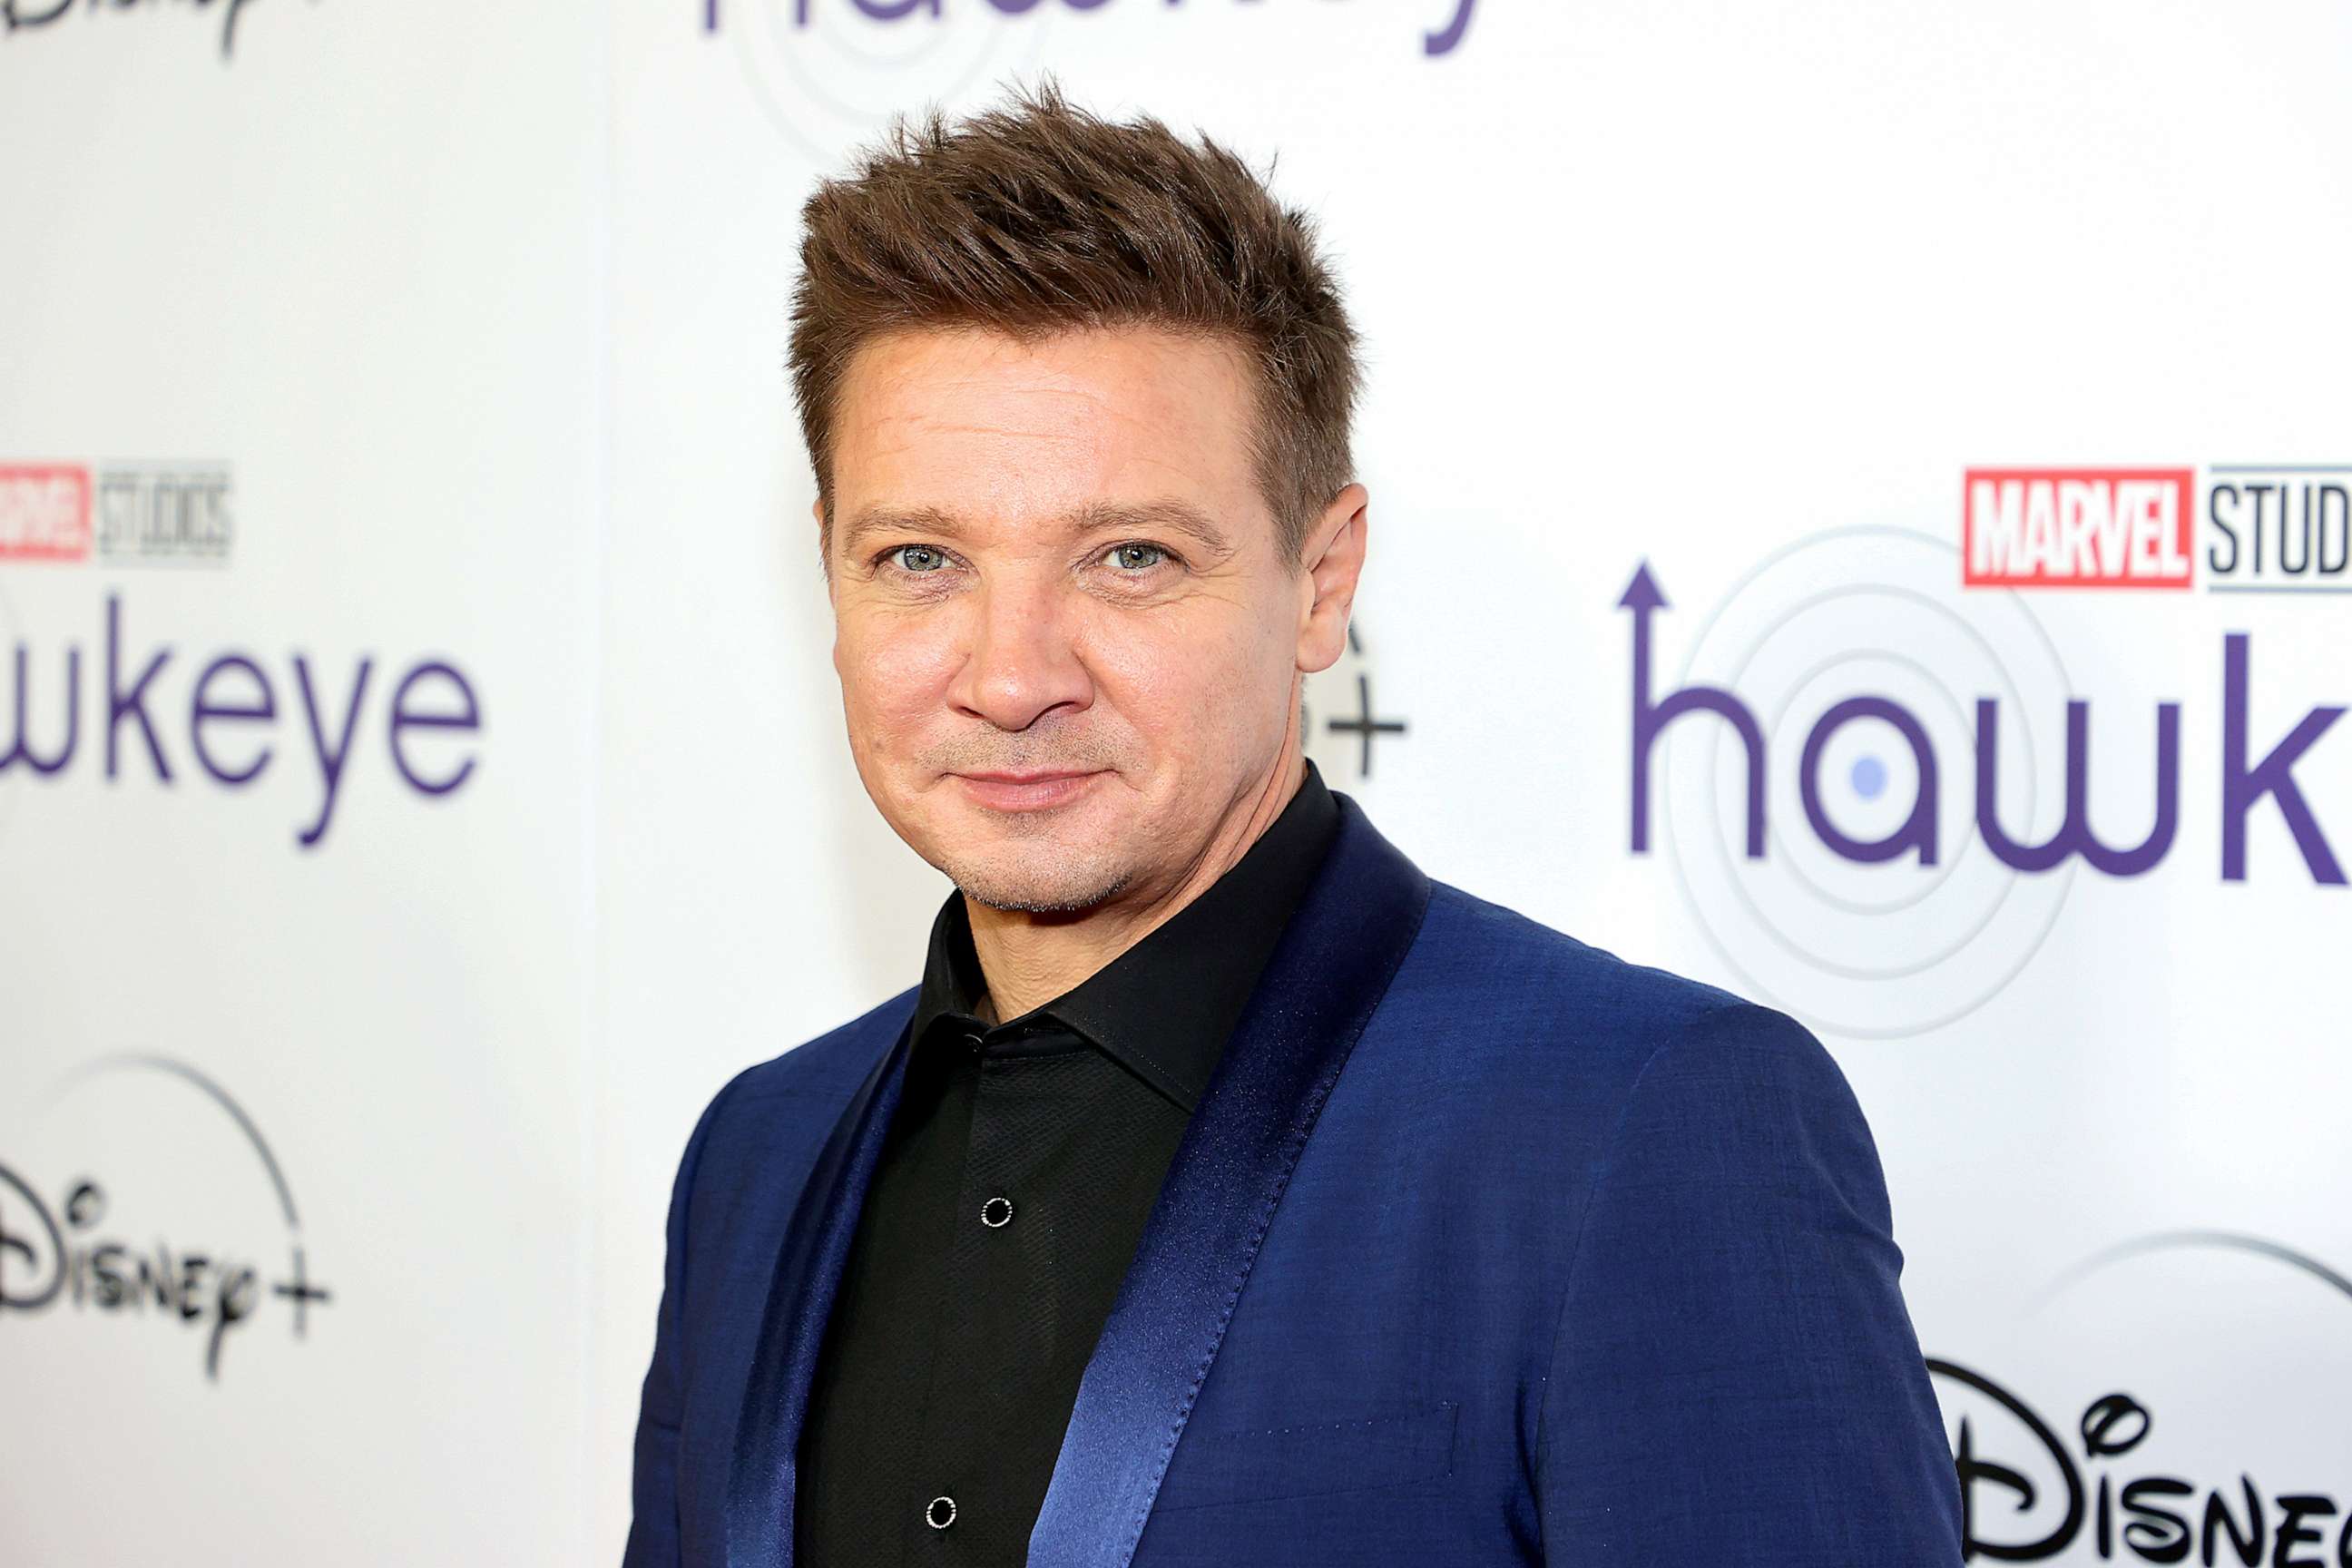 PHOTO: In this Nov. 22, 2021, file photo, Jeremy Renner attends an event in New York.